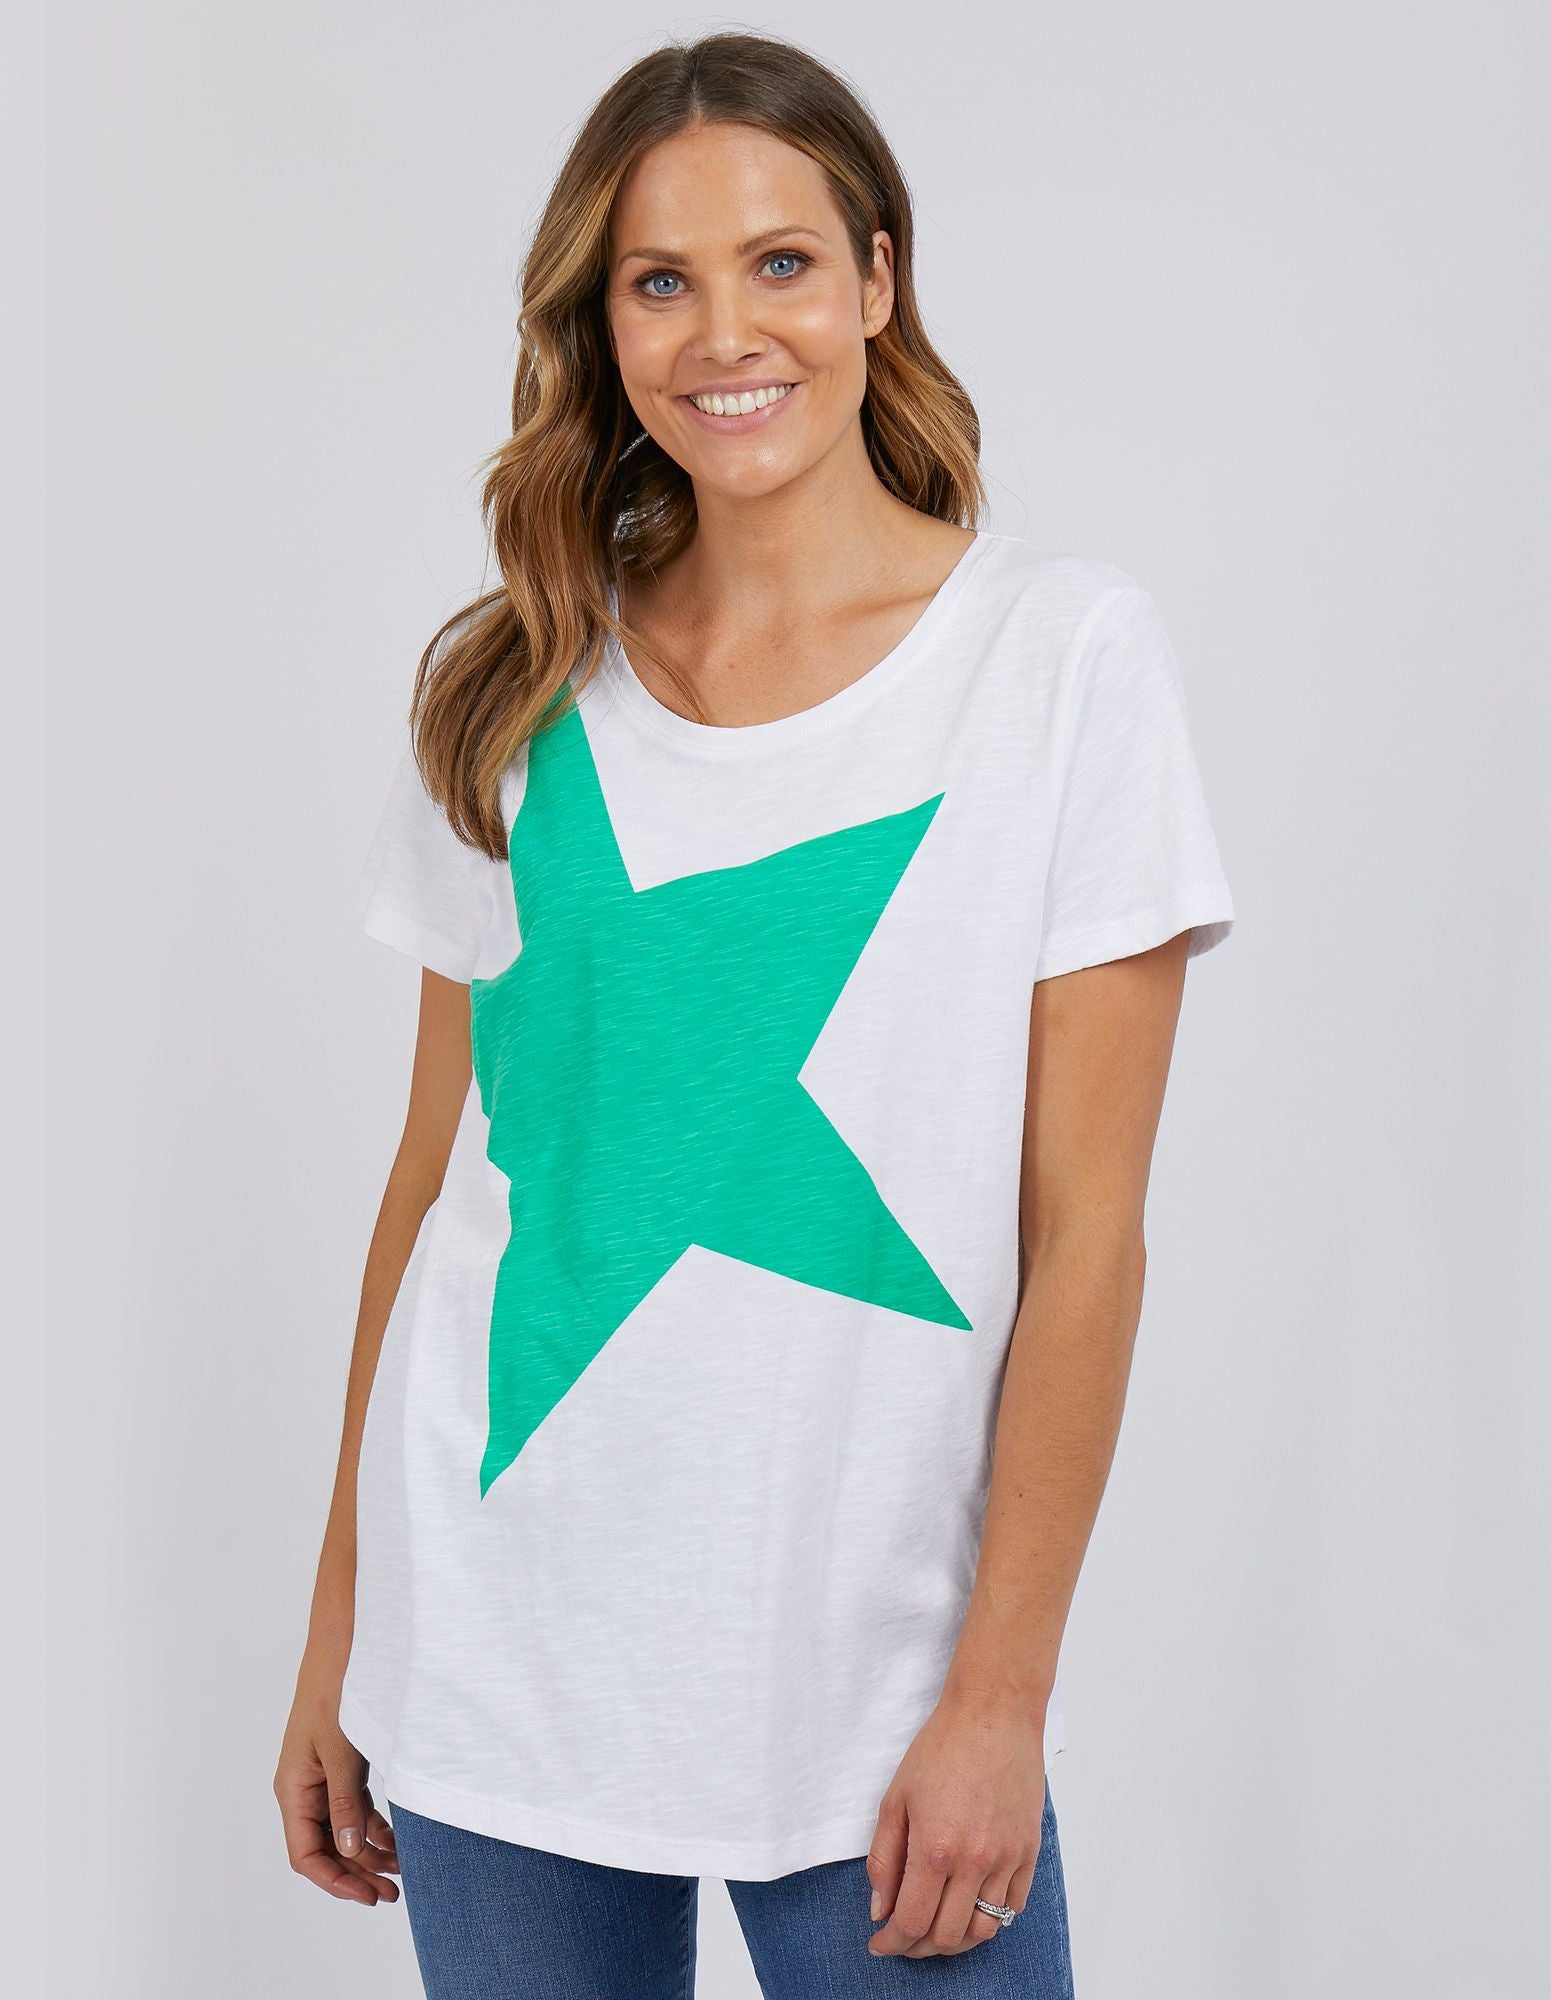 Super Star Tee - White / Green Star - Elm Lifestyle - FUDGE Gifts Home Lifestyle